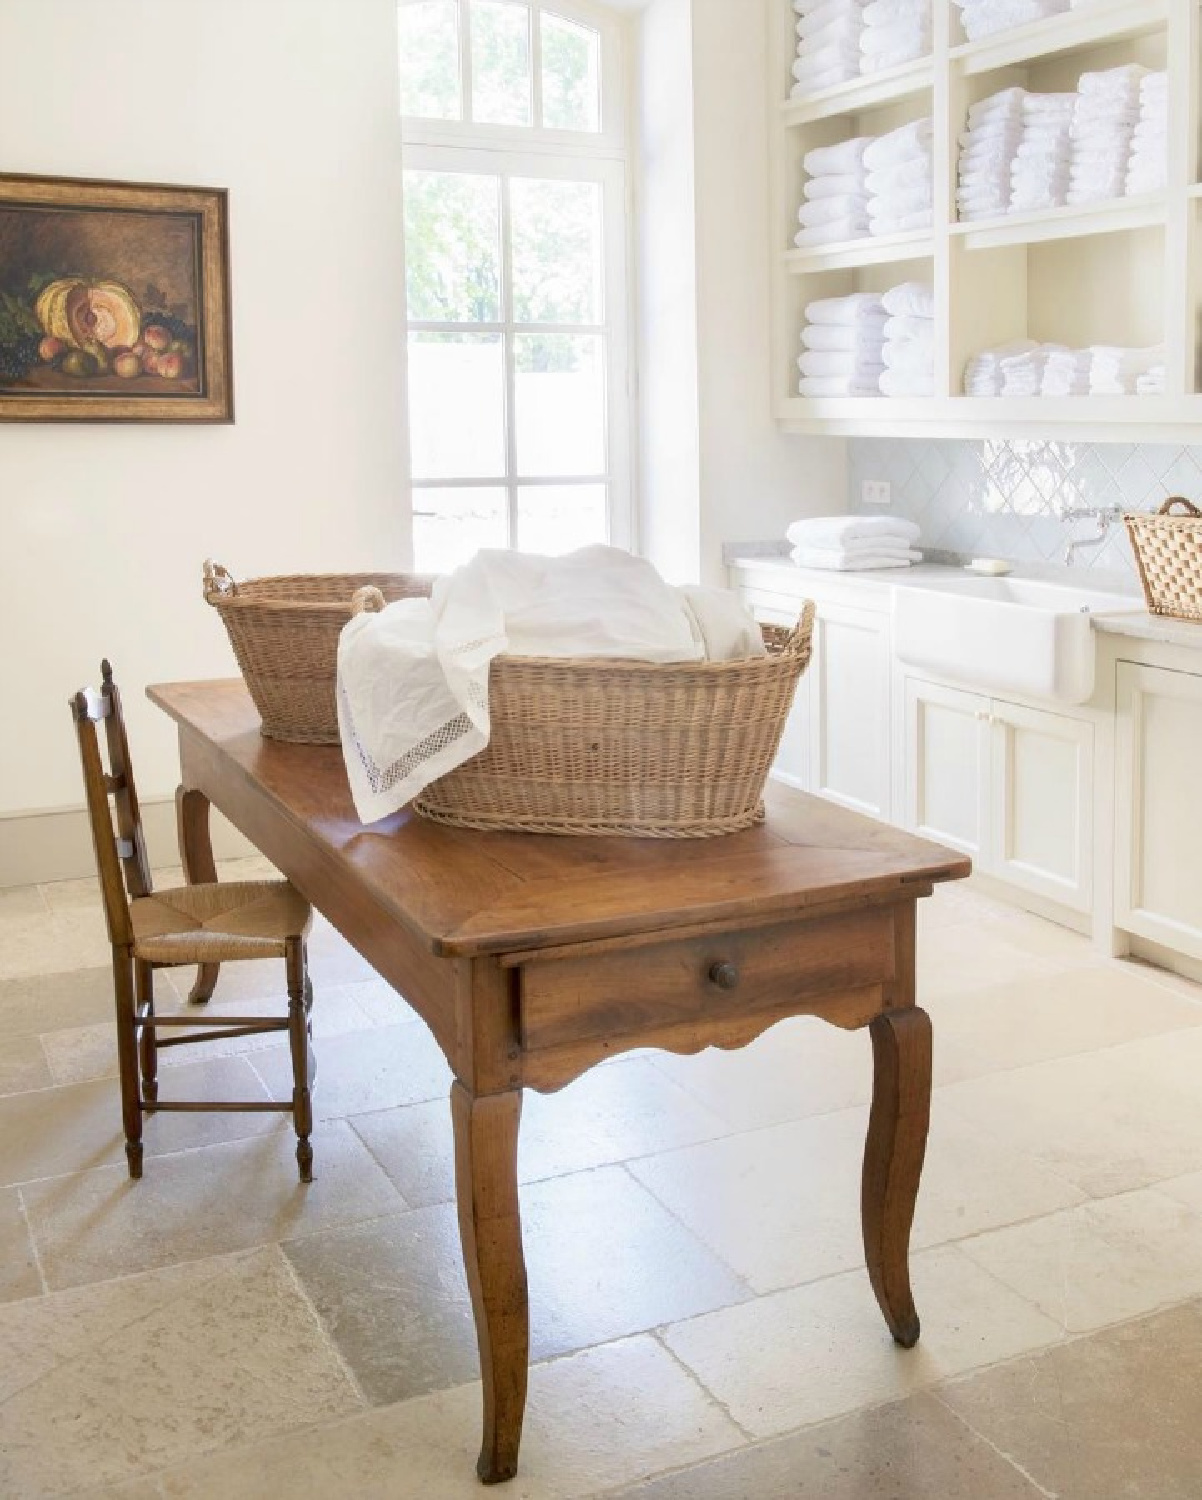 Elegant laundry room at Mas des Poiriers. #laundryrooms #frenchcountry #provencestyle